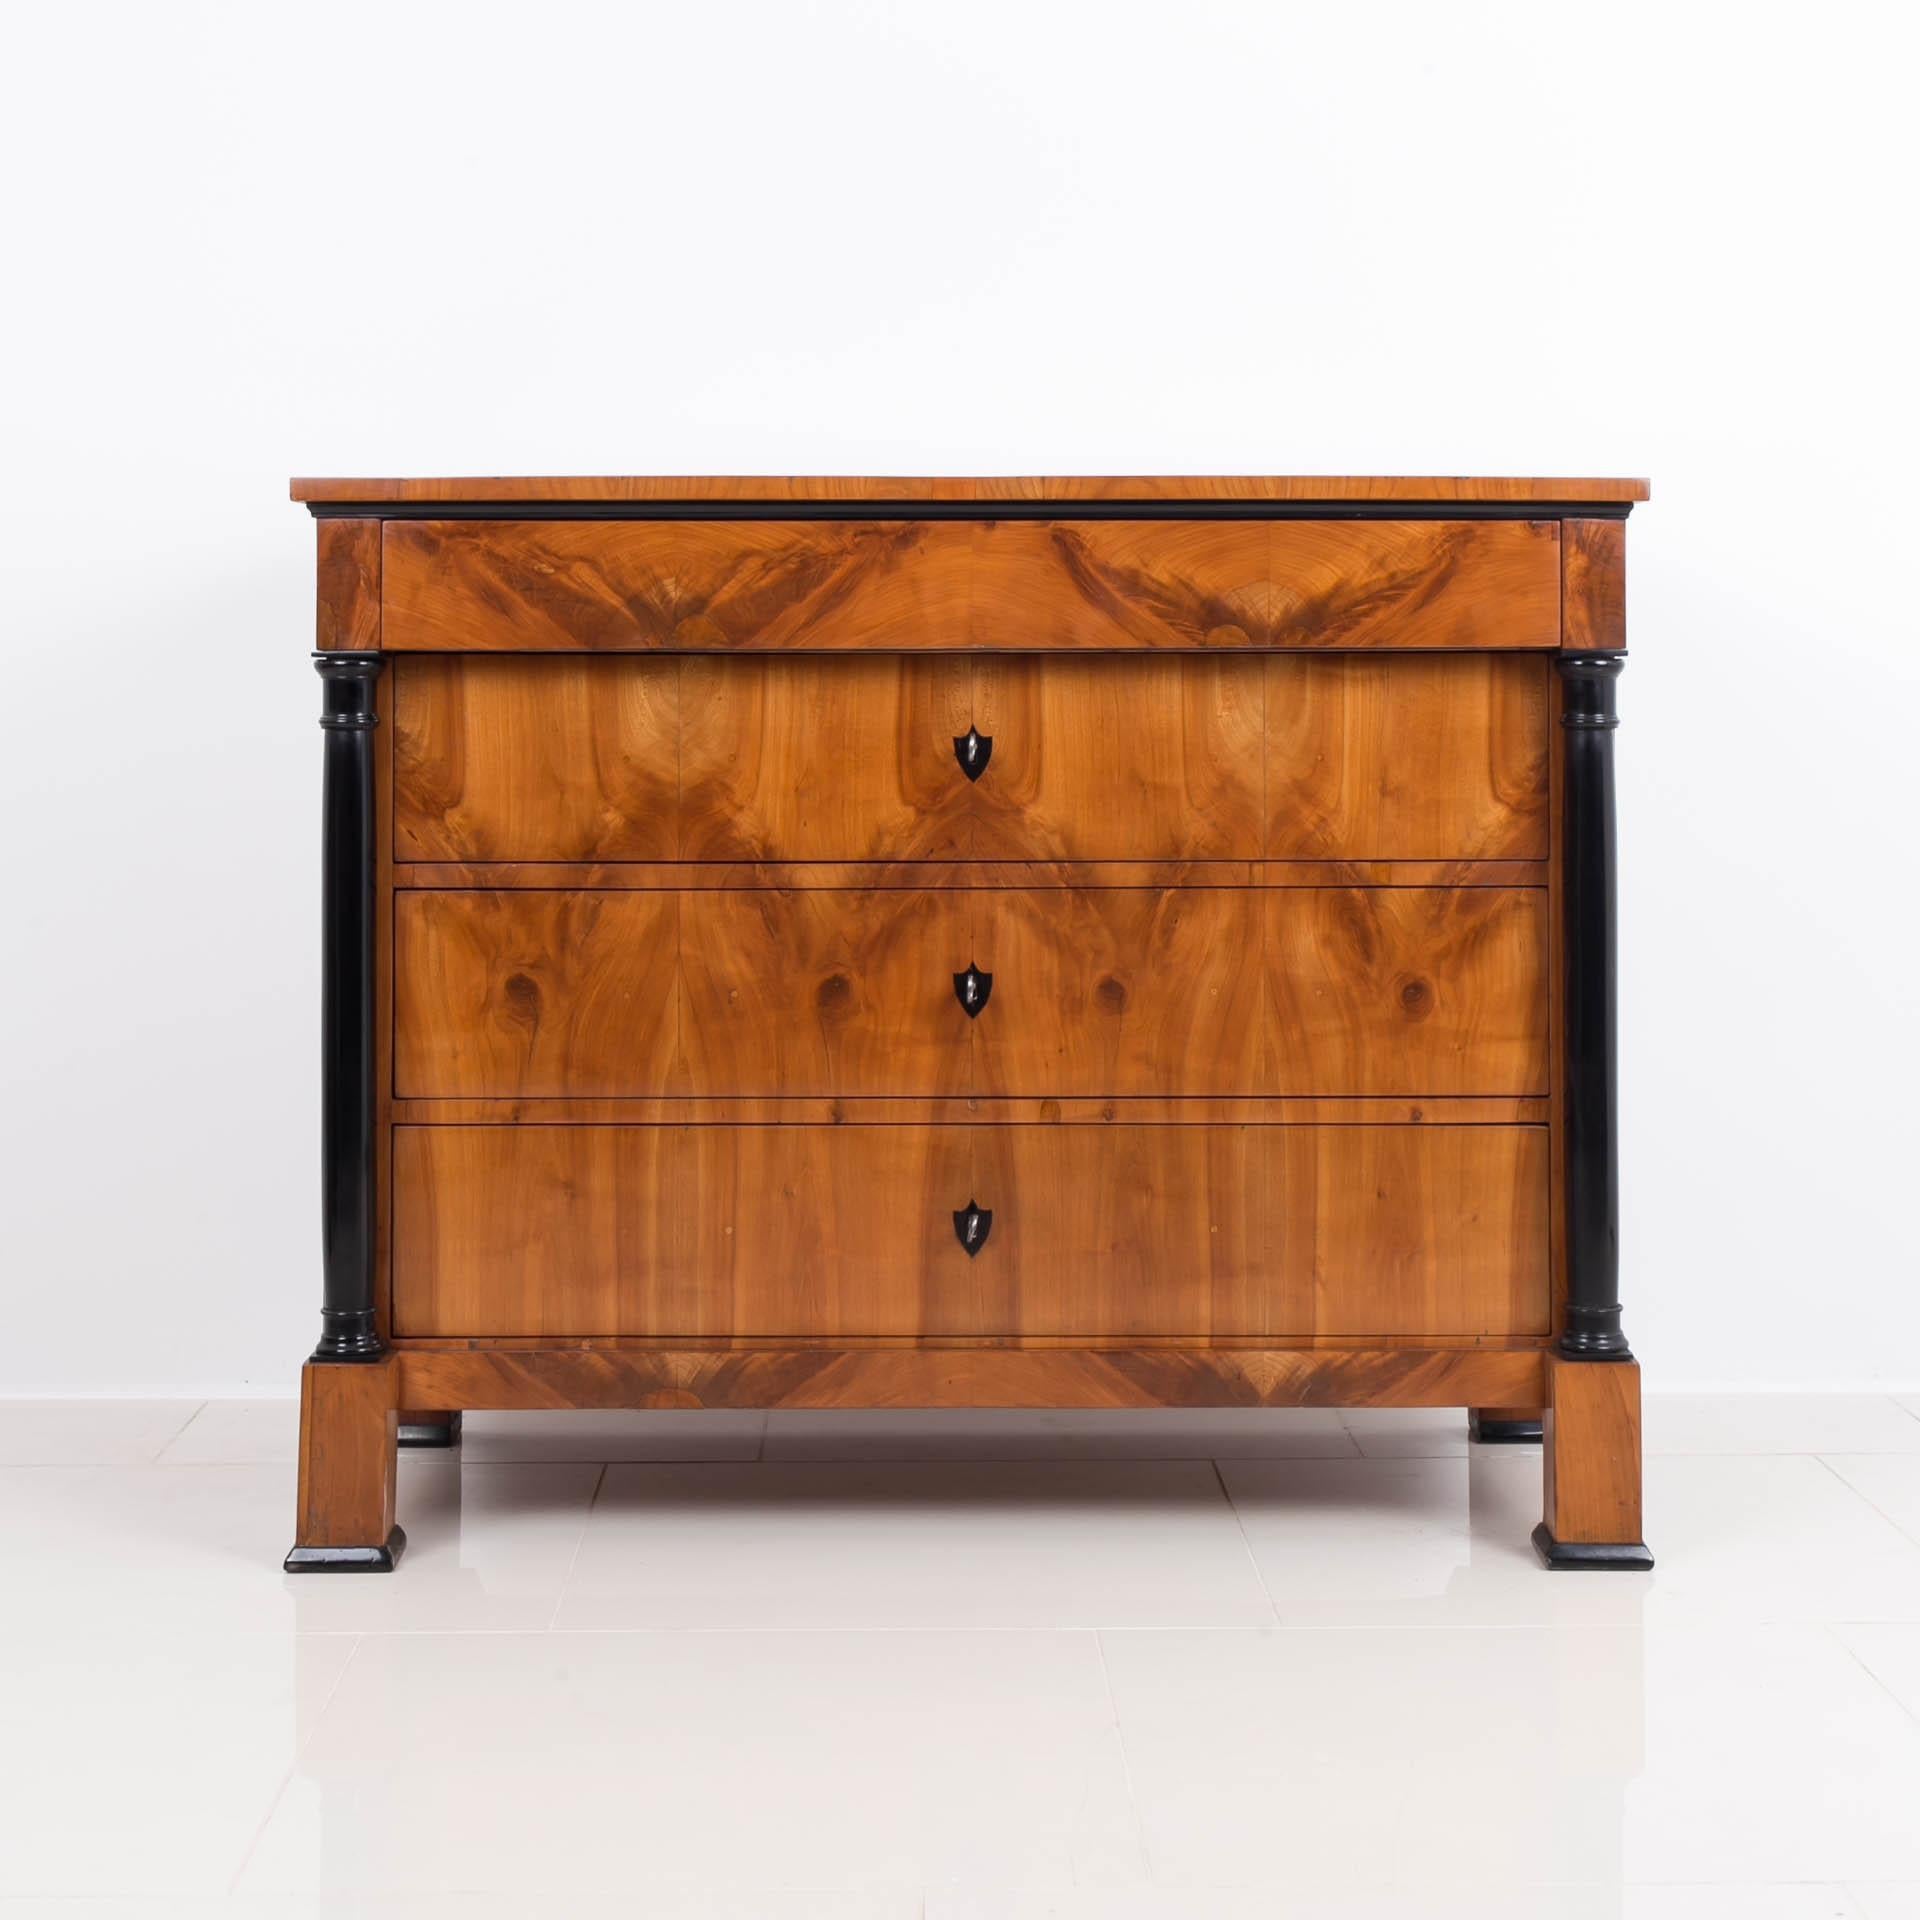 Polished Biedermeier Chest of Drawers, Germany, Early 19th Century